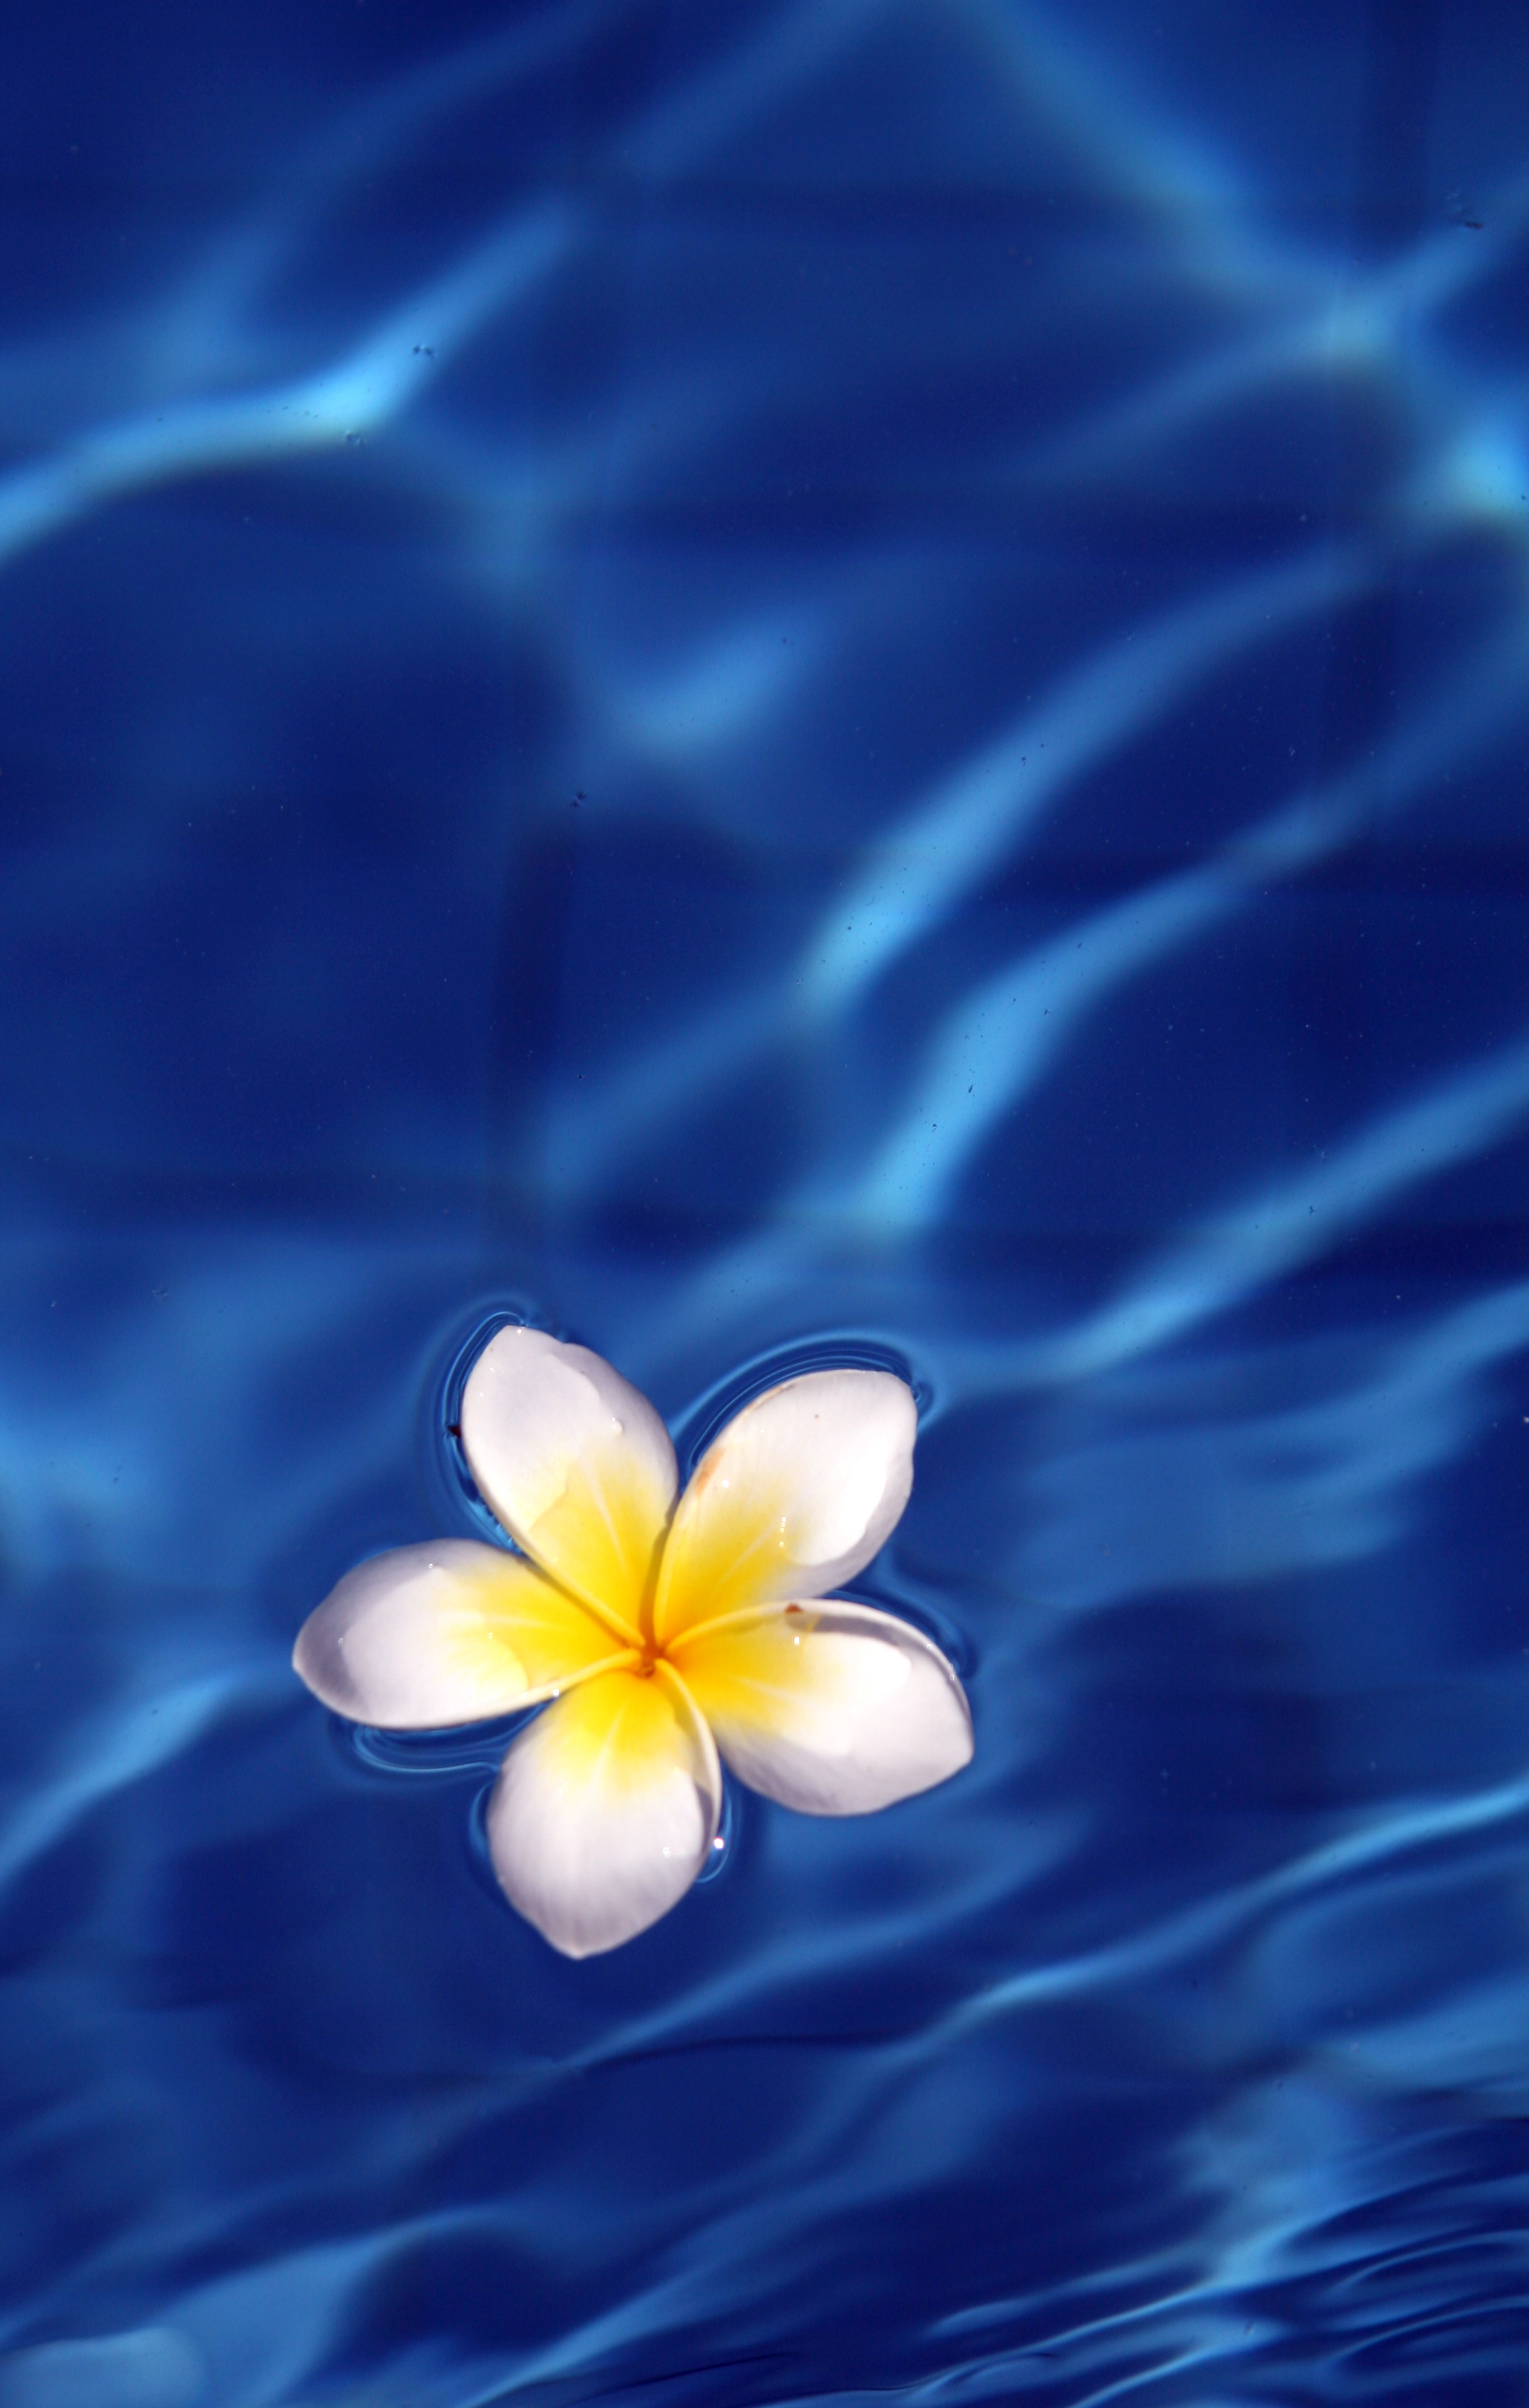 151772 free wallpaper 320x480 for phone, download images waves, glare, water, flower 320x480 for mobile